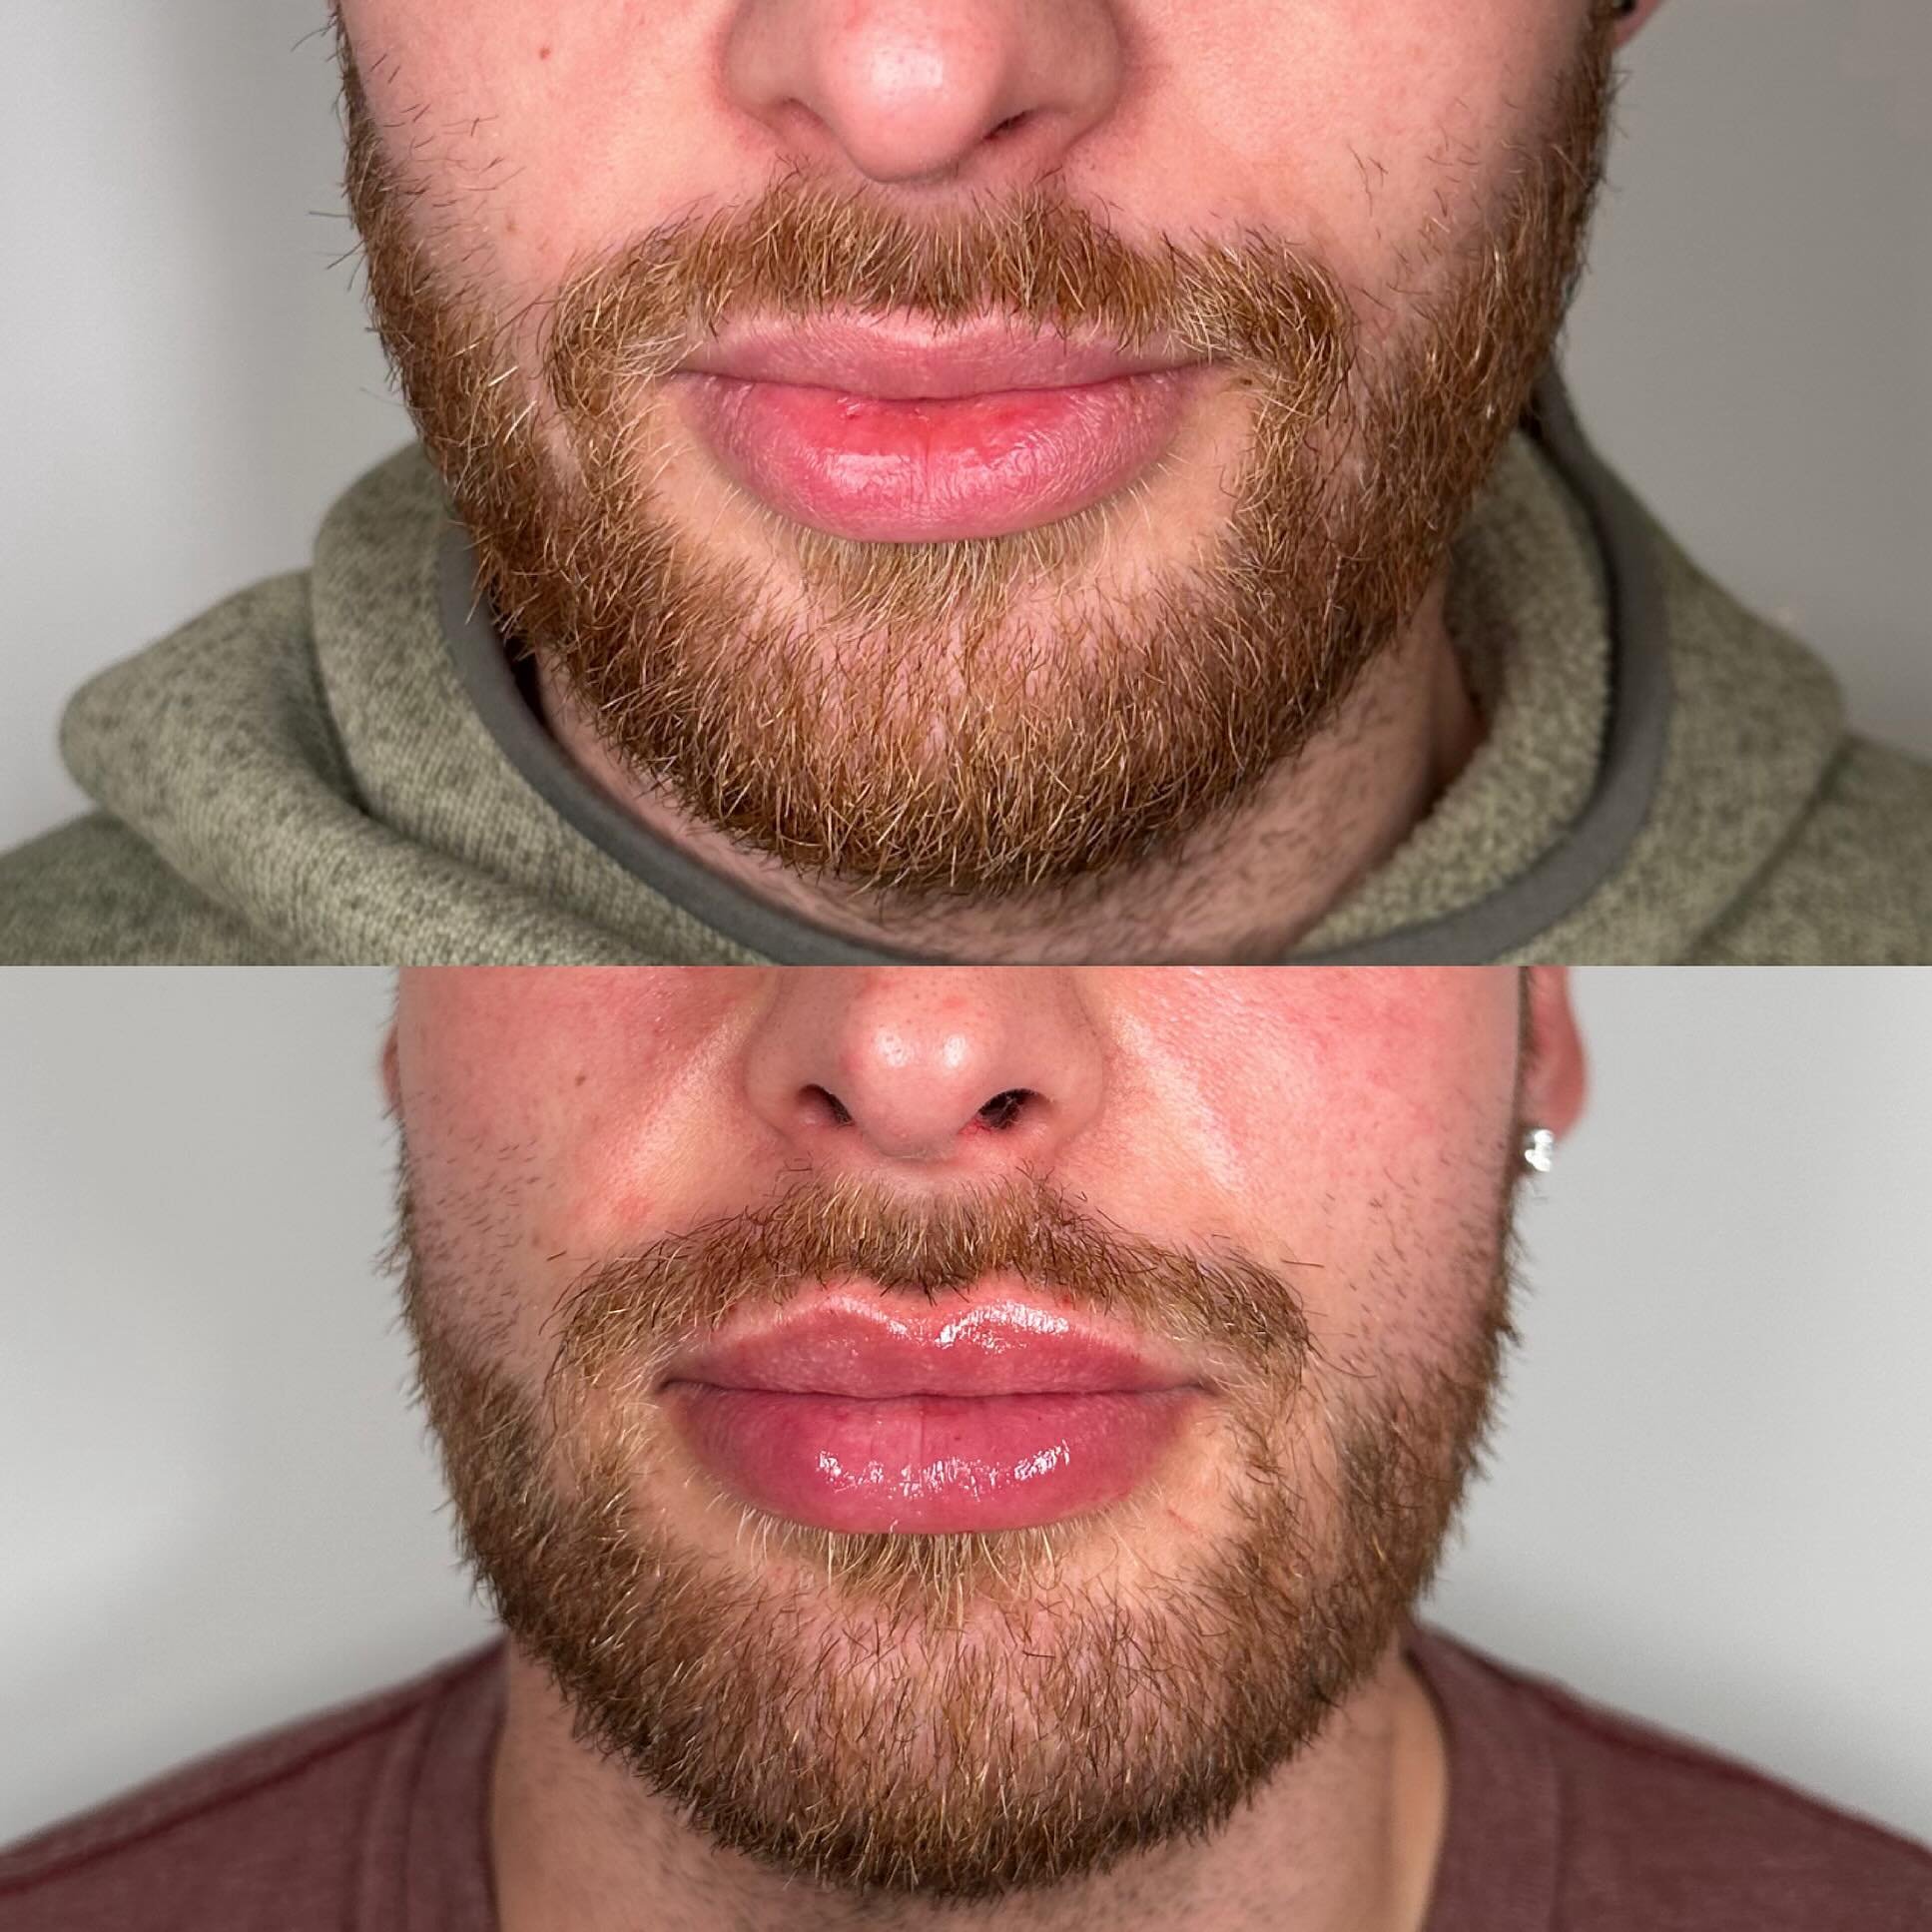 Two Lip Filler treatments over six months, and here we are!!! 🔥🔥🔥 voluminous while still keeping the natural shape, amazing work by the talented @refreshwithdrtaylor 💉

@refreshedmd NW Portland📍
For appointments call/text 503.208.6479 or book on